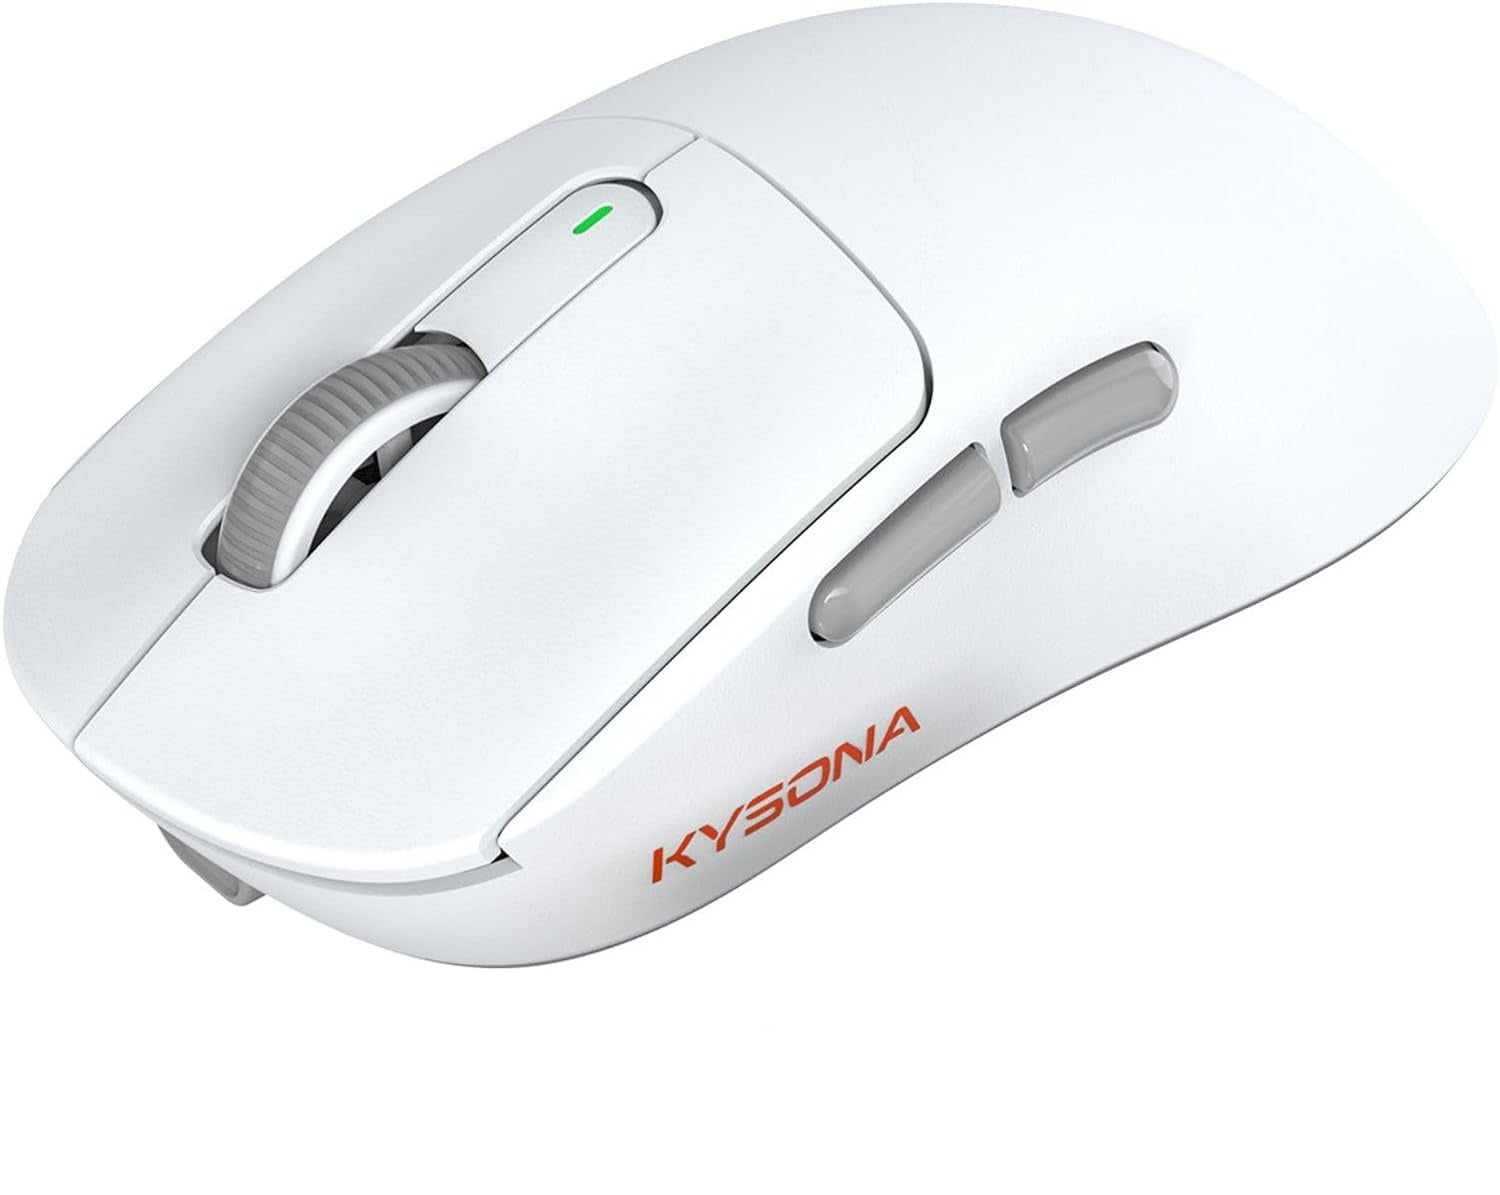 Wireless Gaming Mouse Ultralight Optical Esports 55g, White